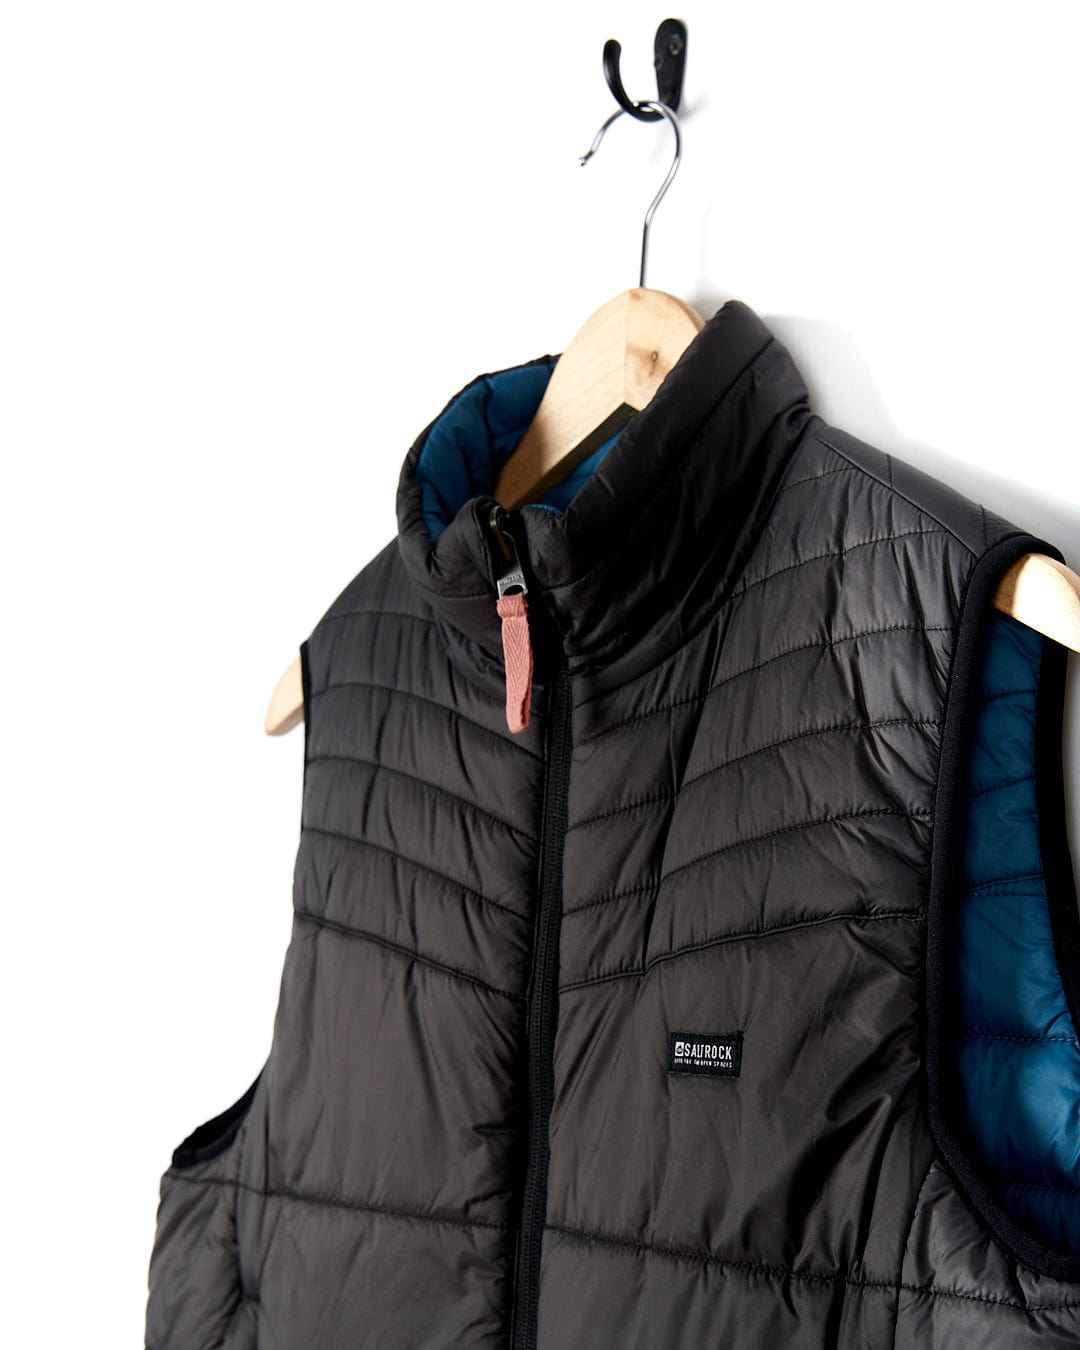 A Saltrock - Womens Ridleys Reversible Gilet in black and blue, ideal as a travel buddy due to its water-resistant features, hanging on a hanger.